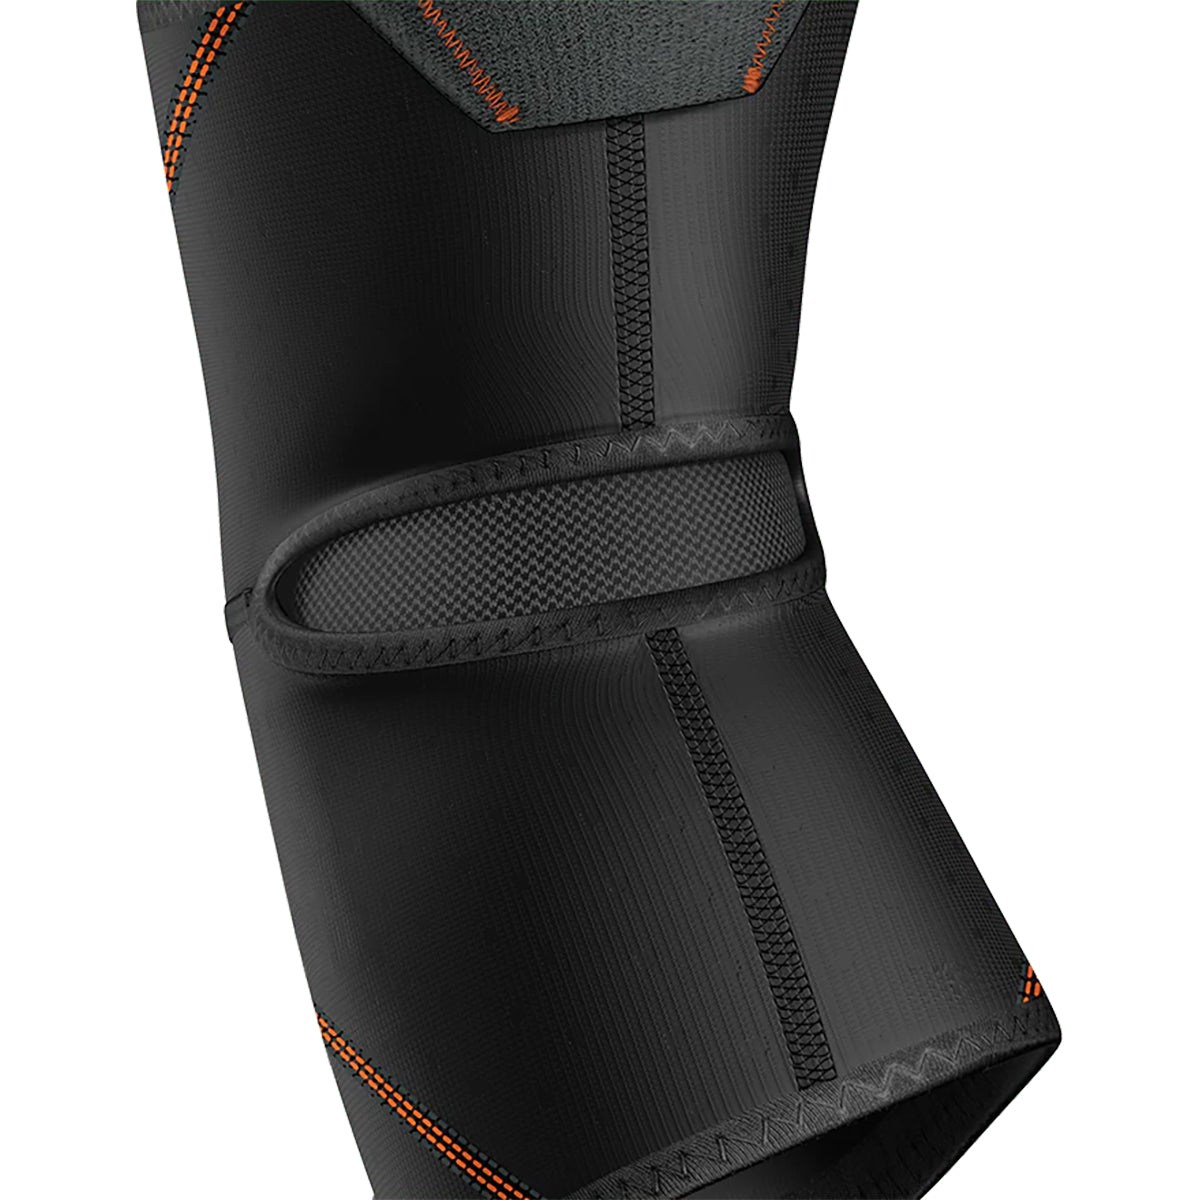 Shock Doctor Elbow Compression Sleeve with Extended Coverage - Black Shock Doctor